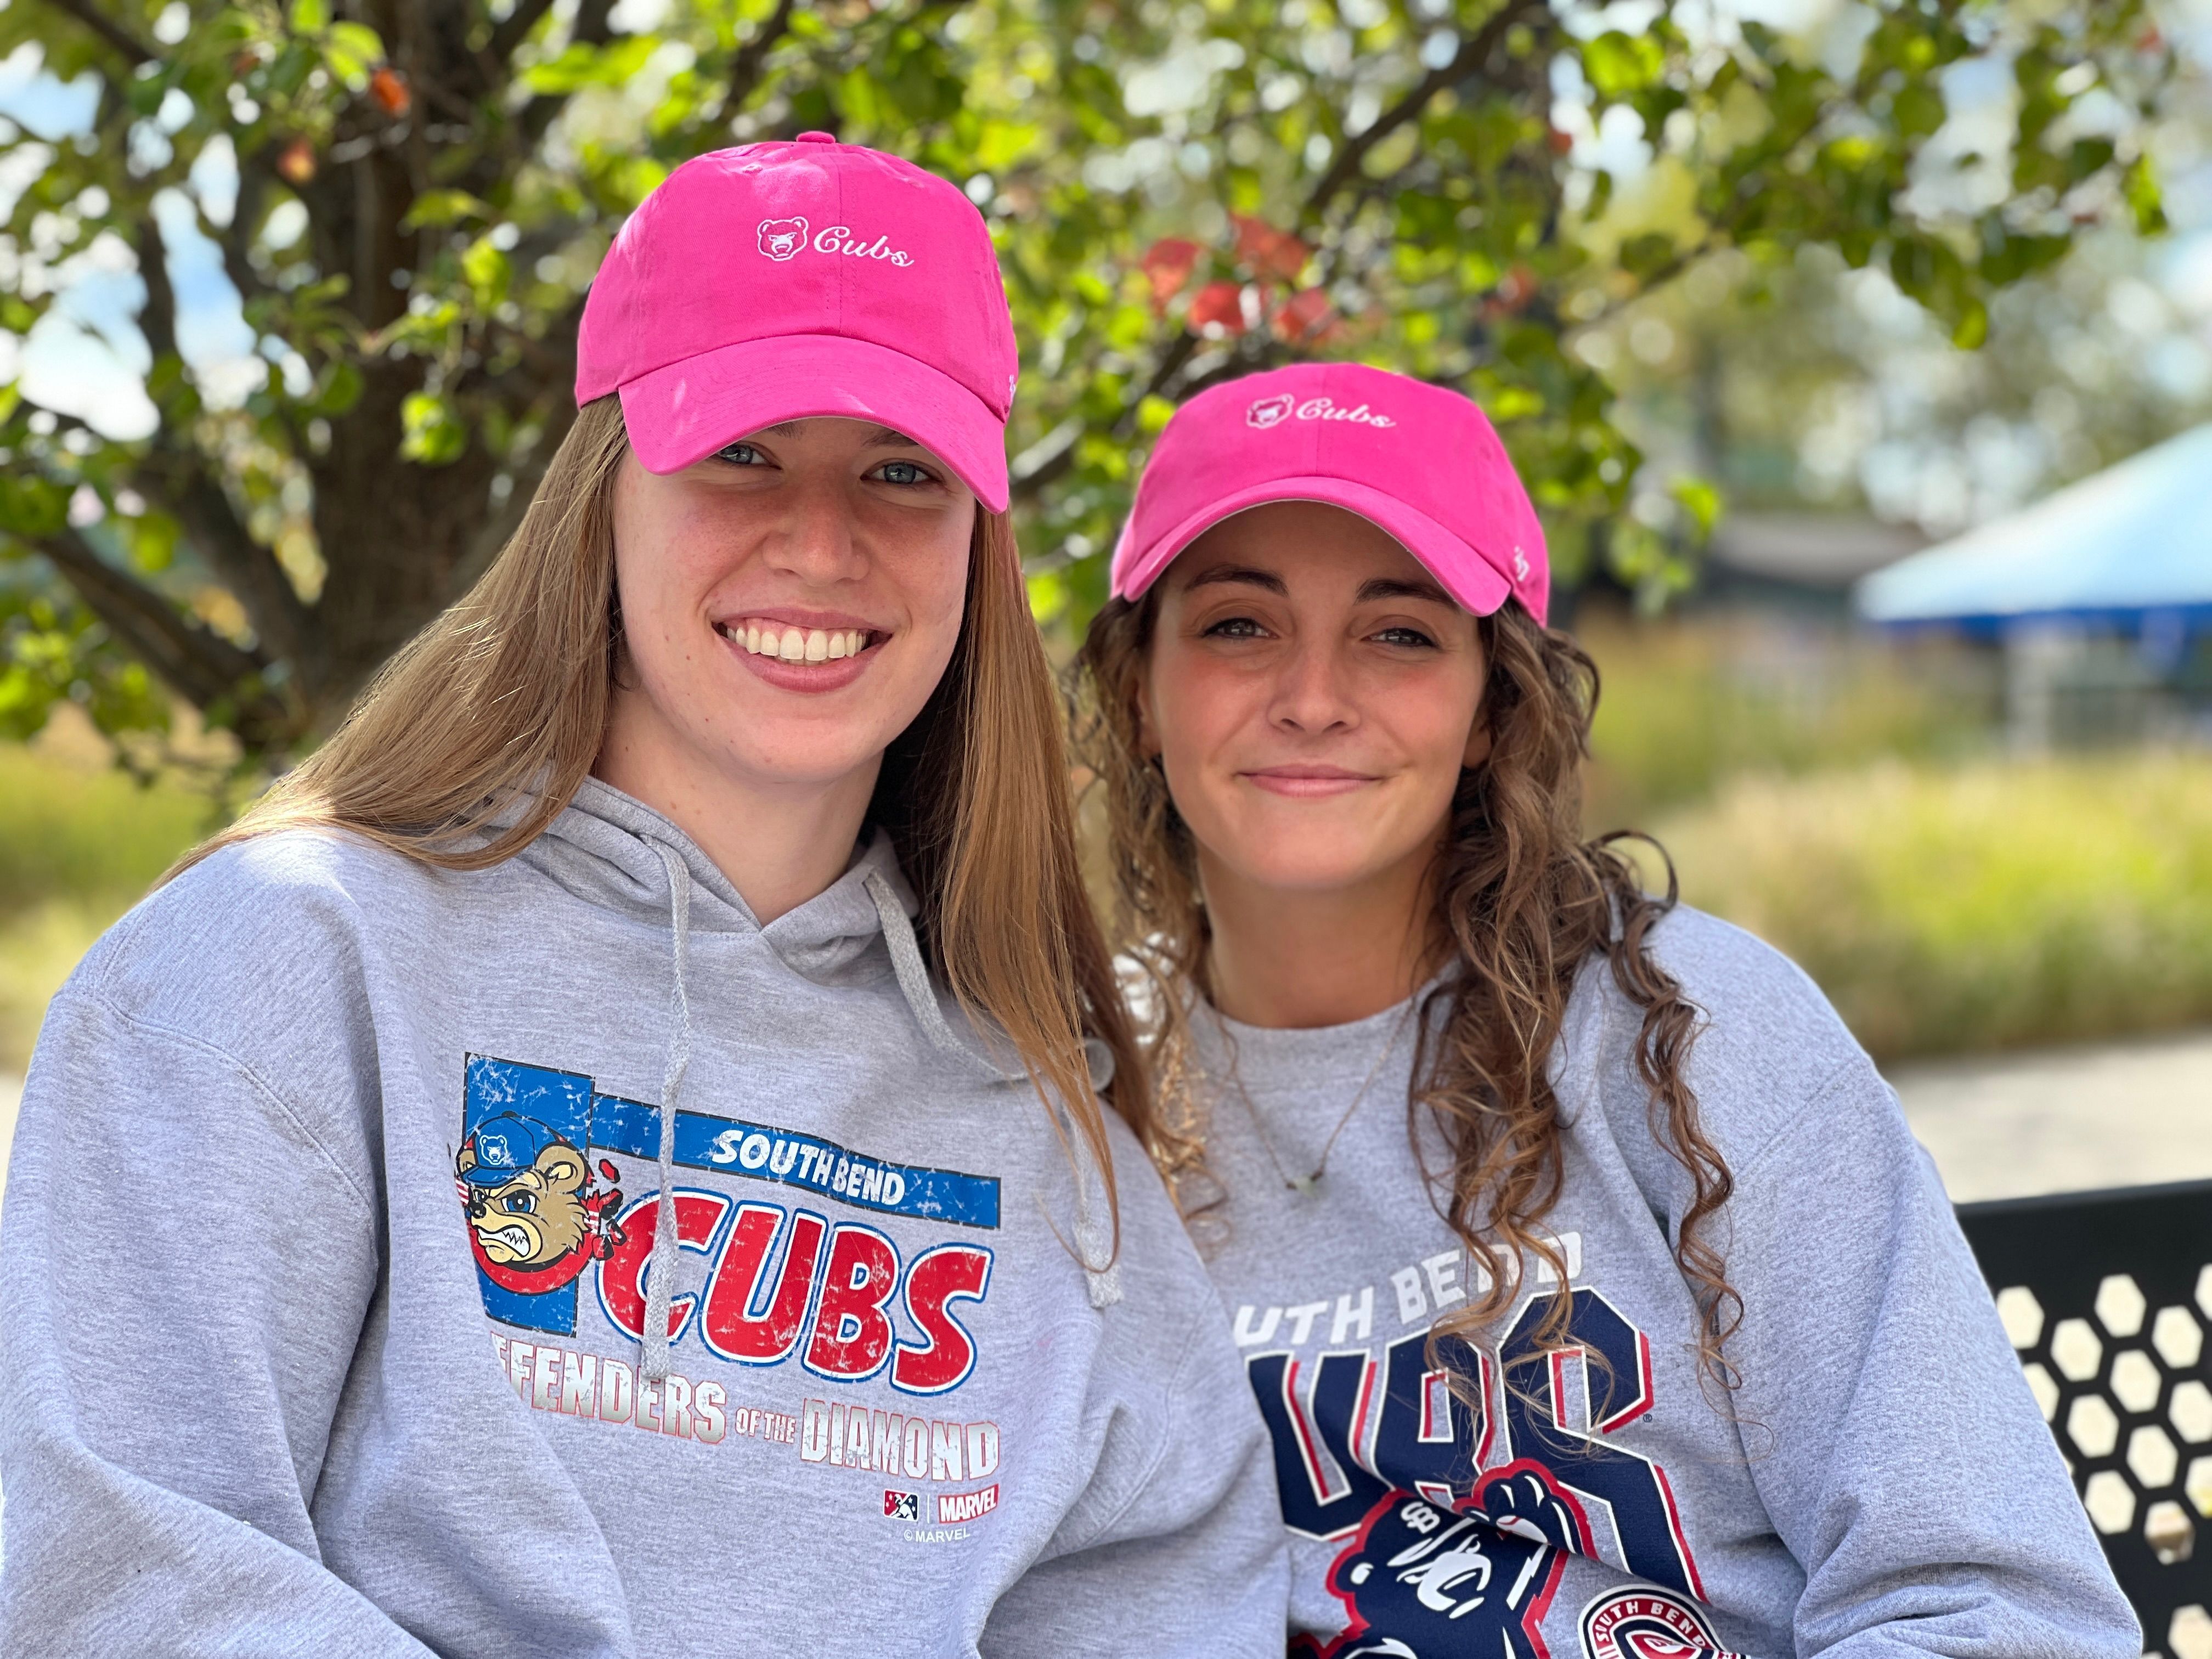 South Bend Cubs on X: Receive a FREE #SBCubs pink hat with $25 or more  apparel purchase. Offer valid in-store and online. Add cap to order and  enter promo code BESTRONG at